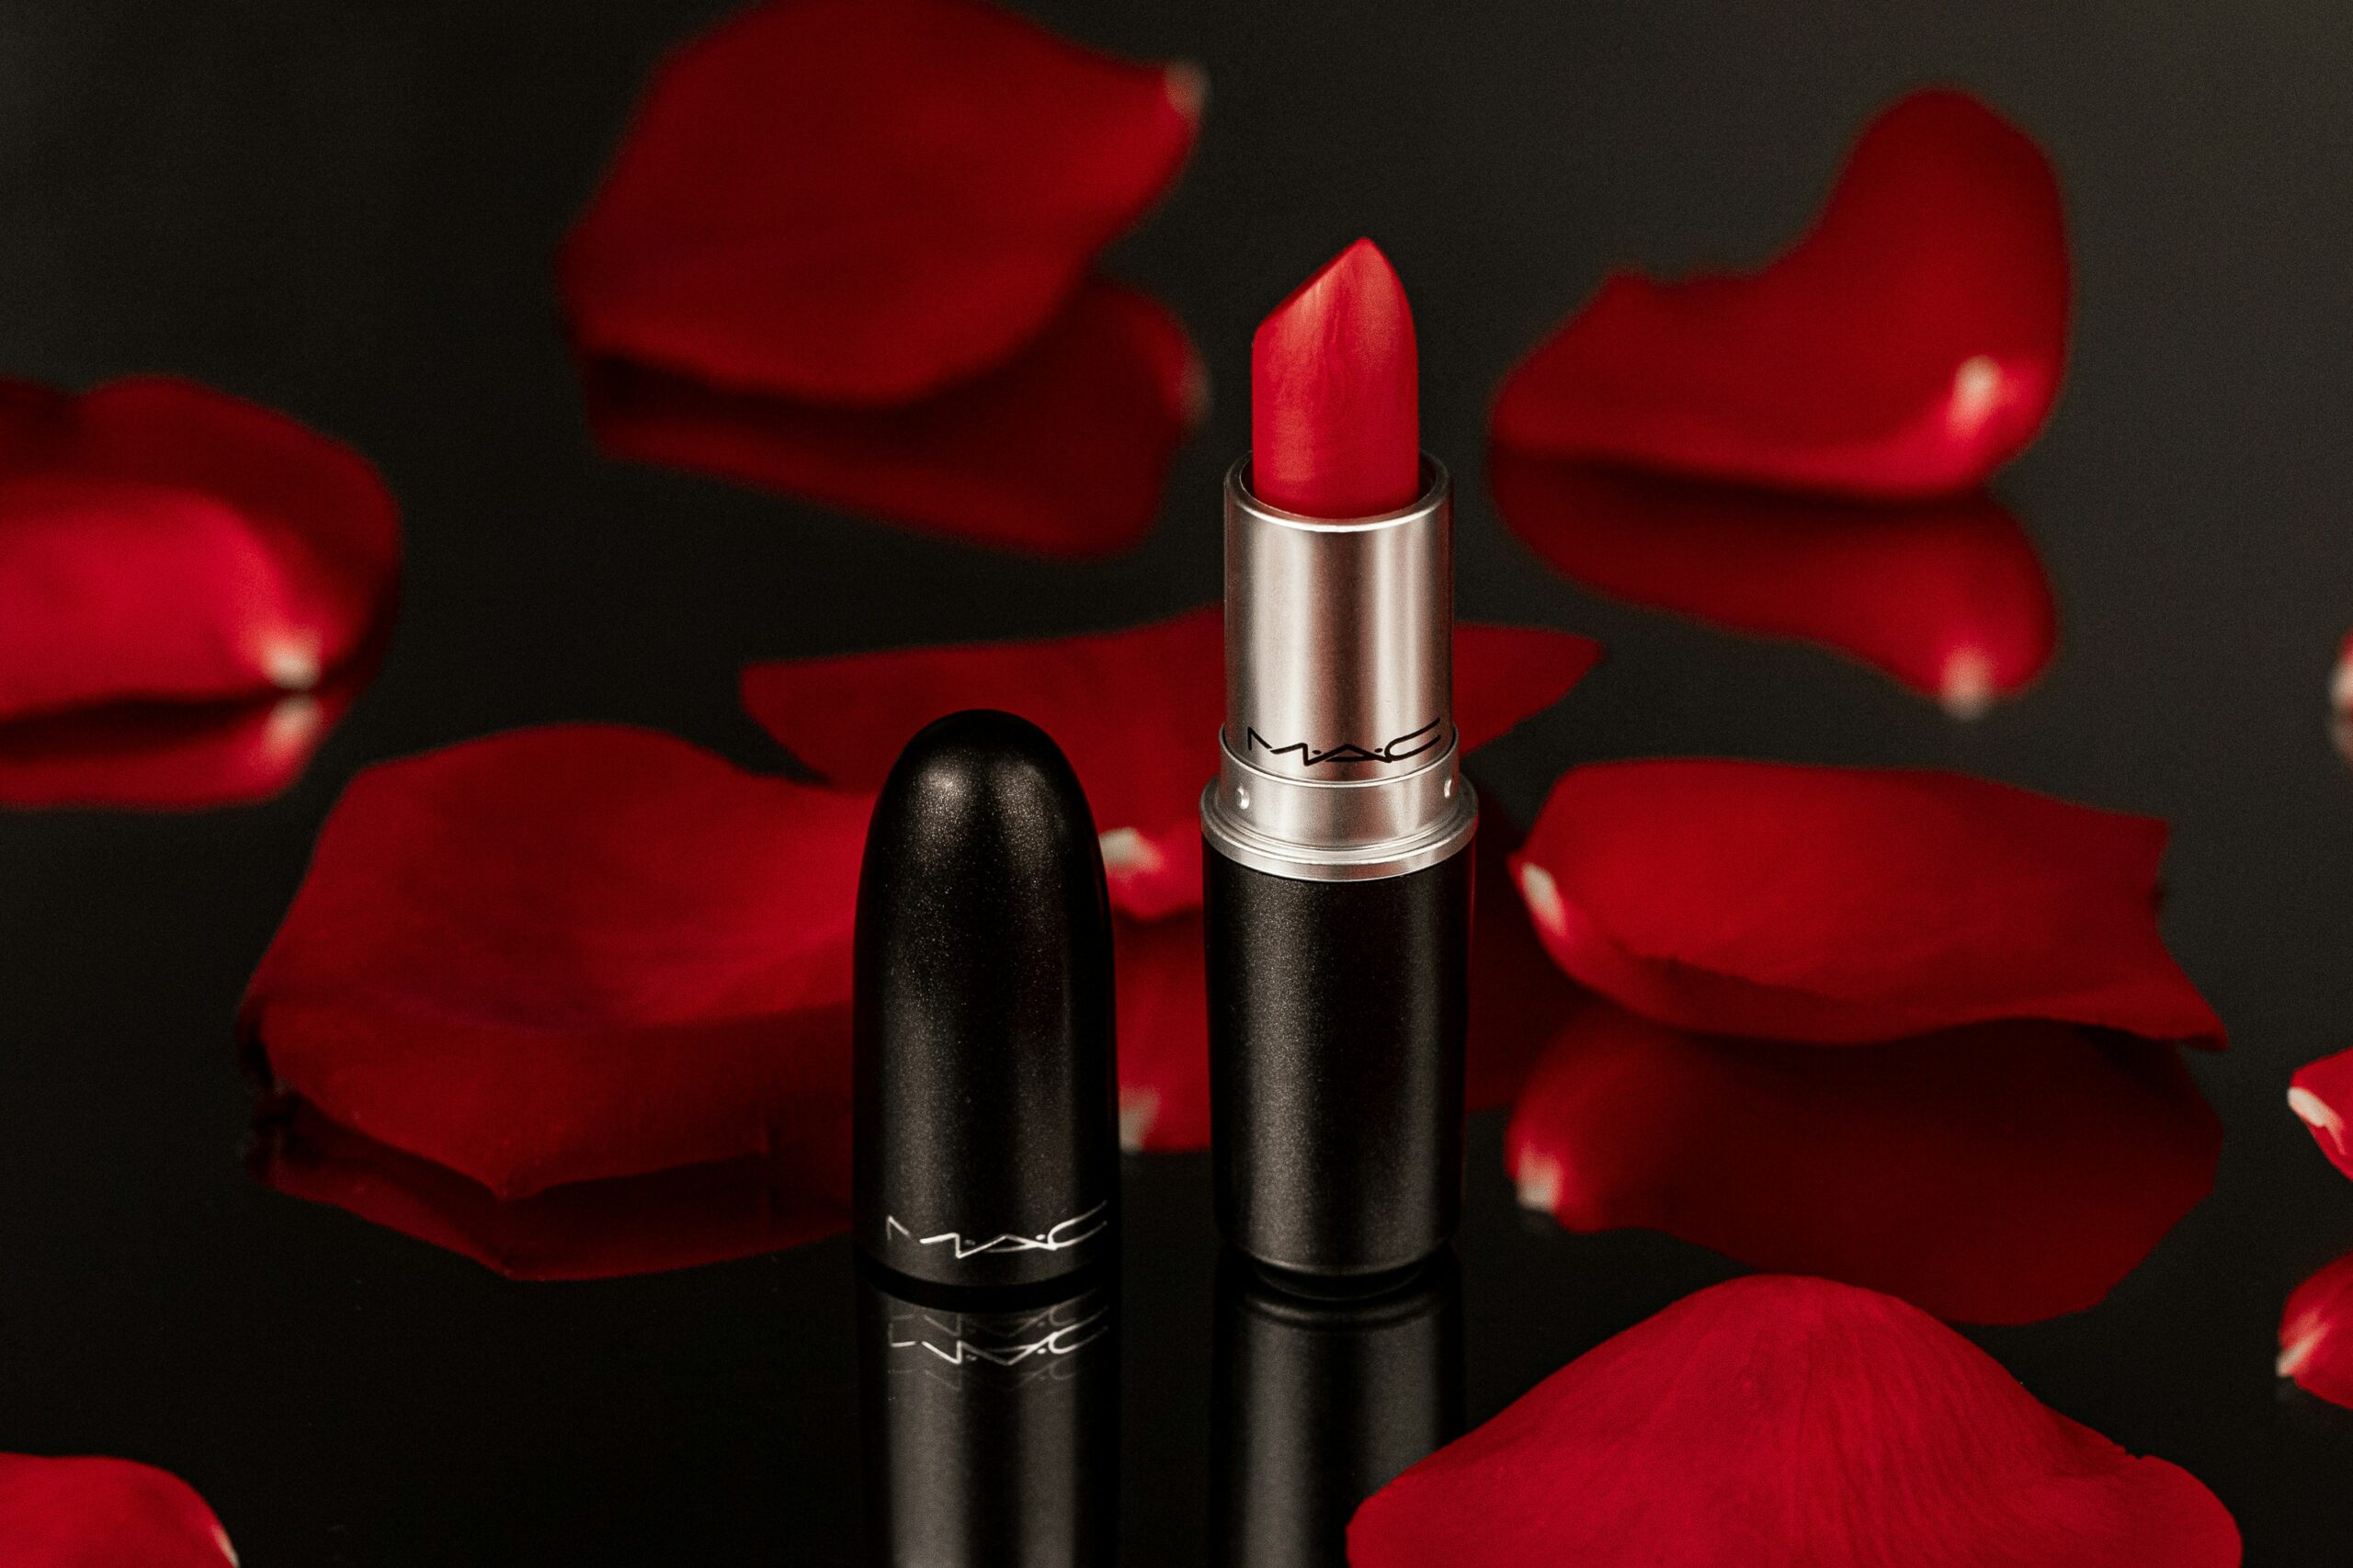 BEAUTY GIVEAWAY: MAC LIPSTICK OR EYESHADOW OF YOUR CHOICE